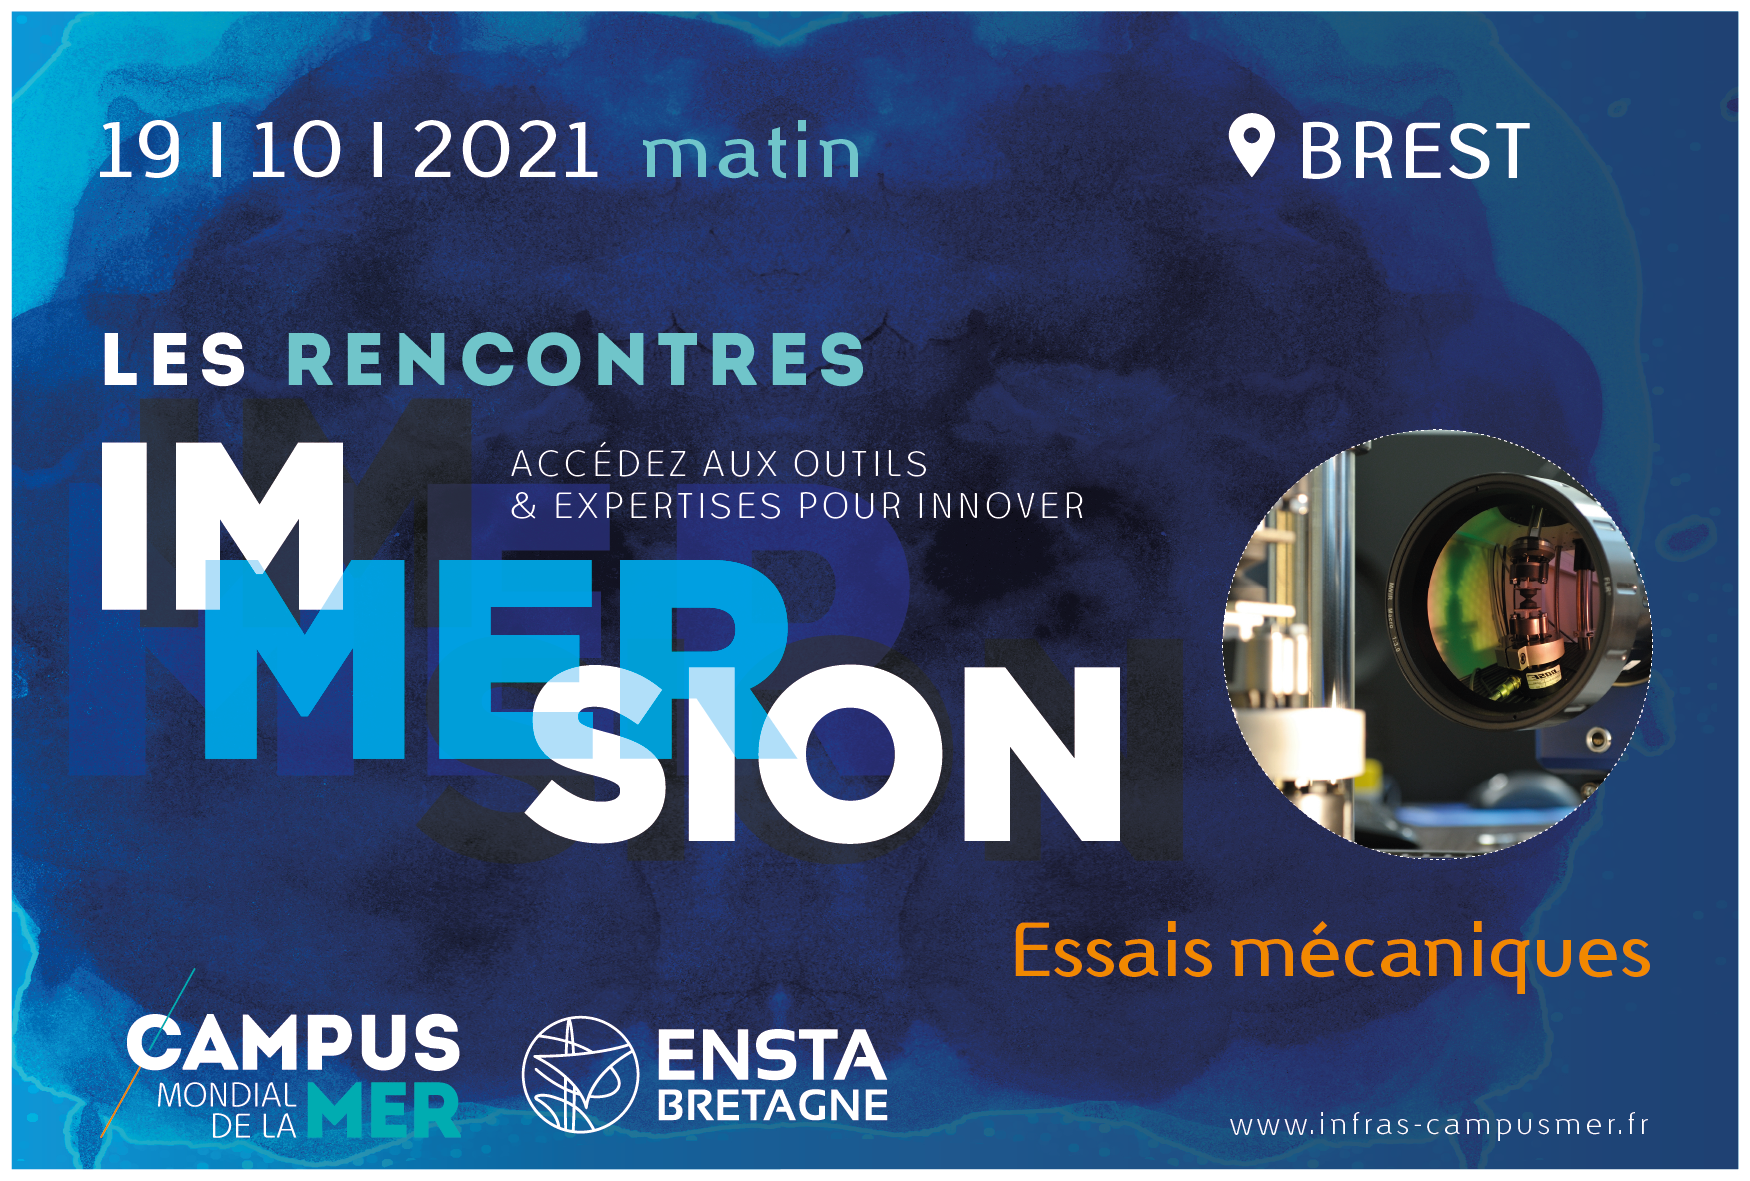 Rencontres IMMERSION n°3